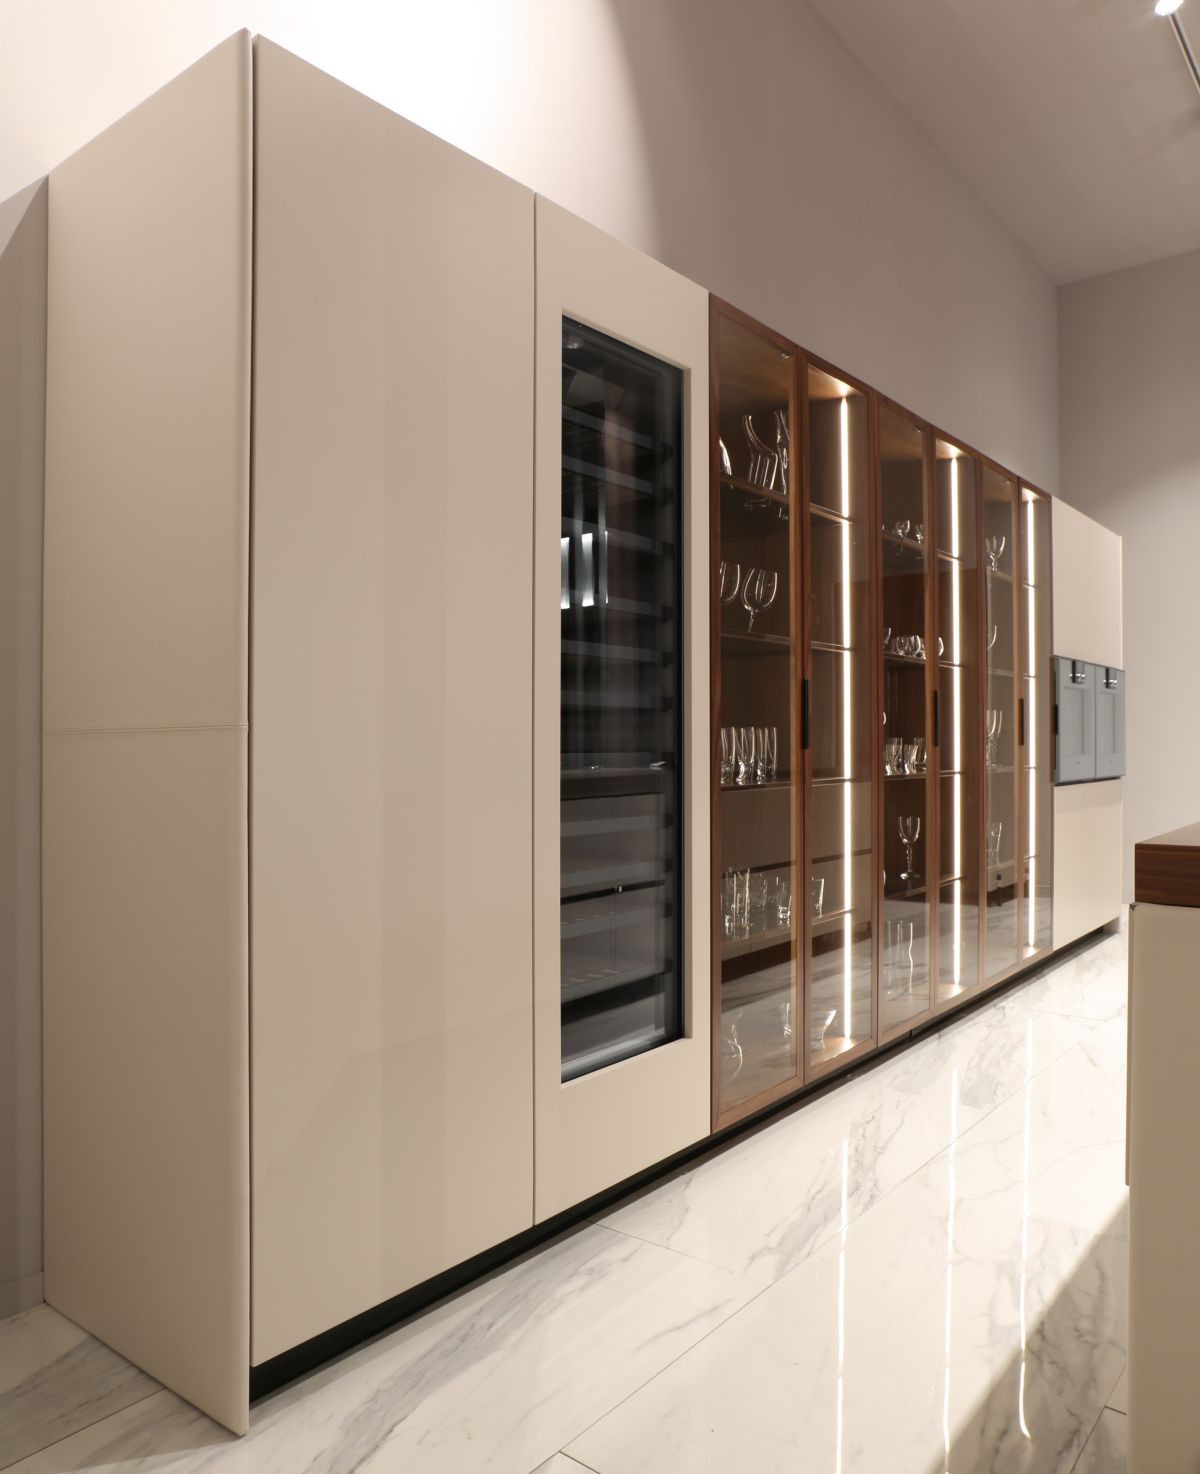 The large cabinet unit offers lots of storage while maintaining a very simple and modern appearance